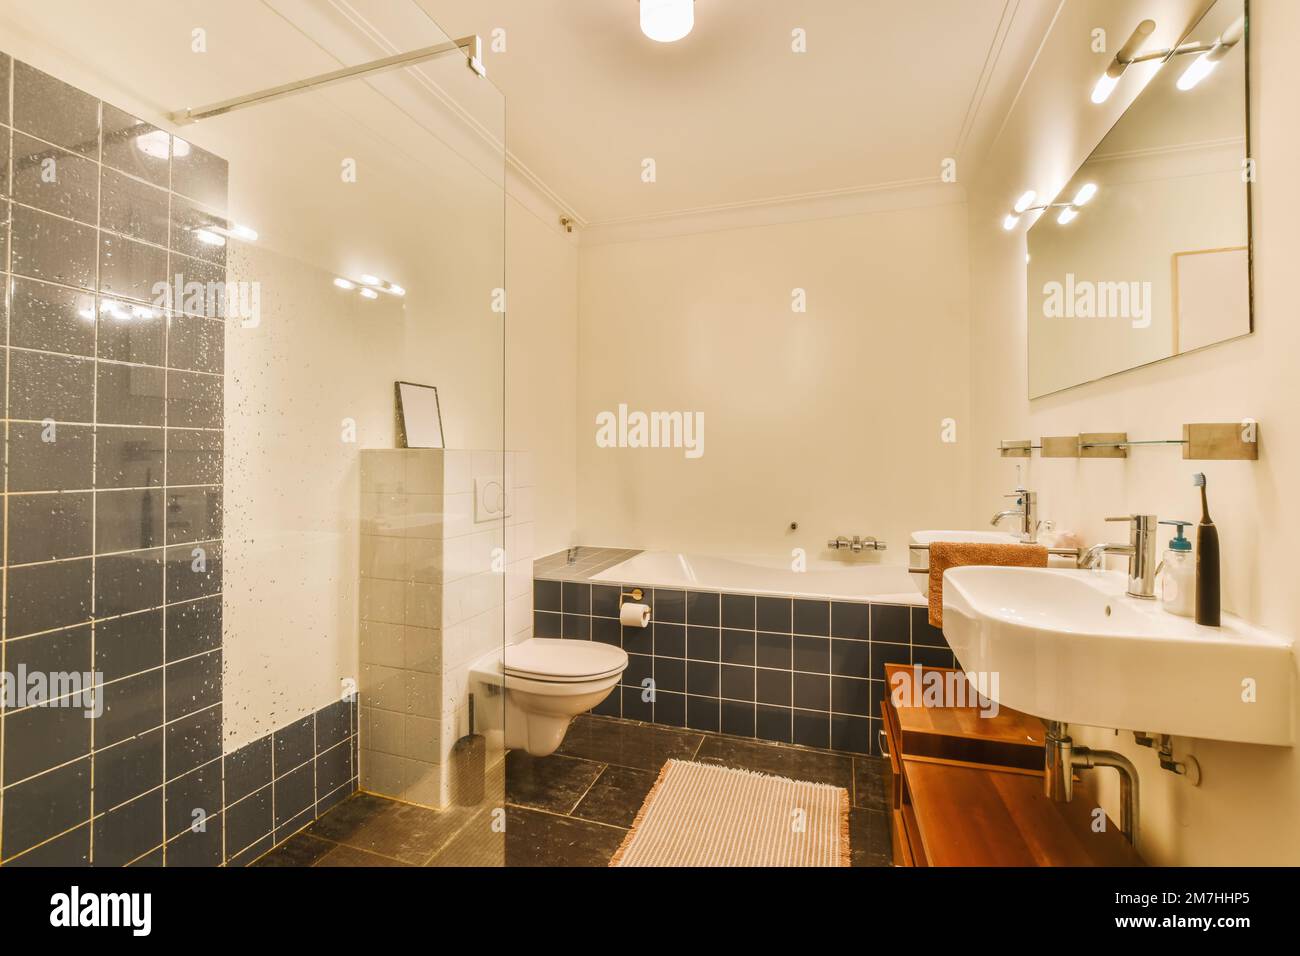 a bathroom that is very clean and ready to be used as a shower stall or room for the people who use it Stock Photo